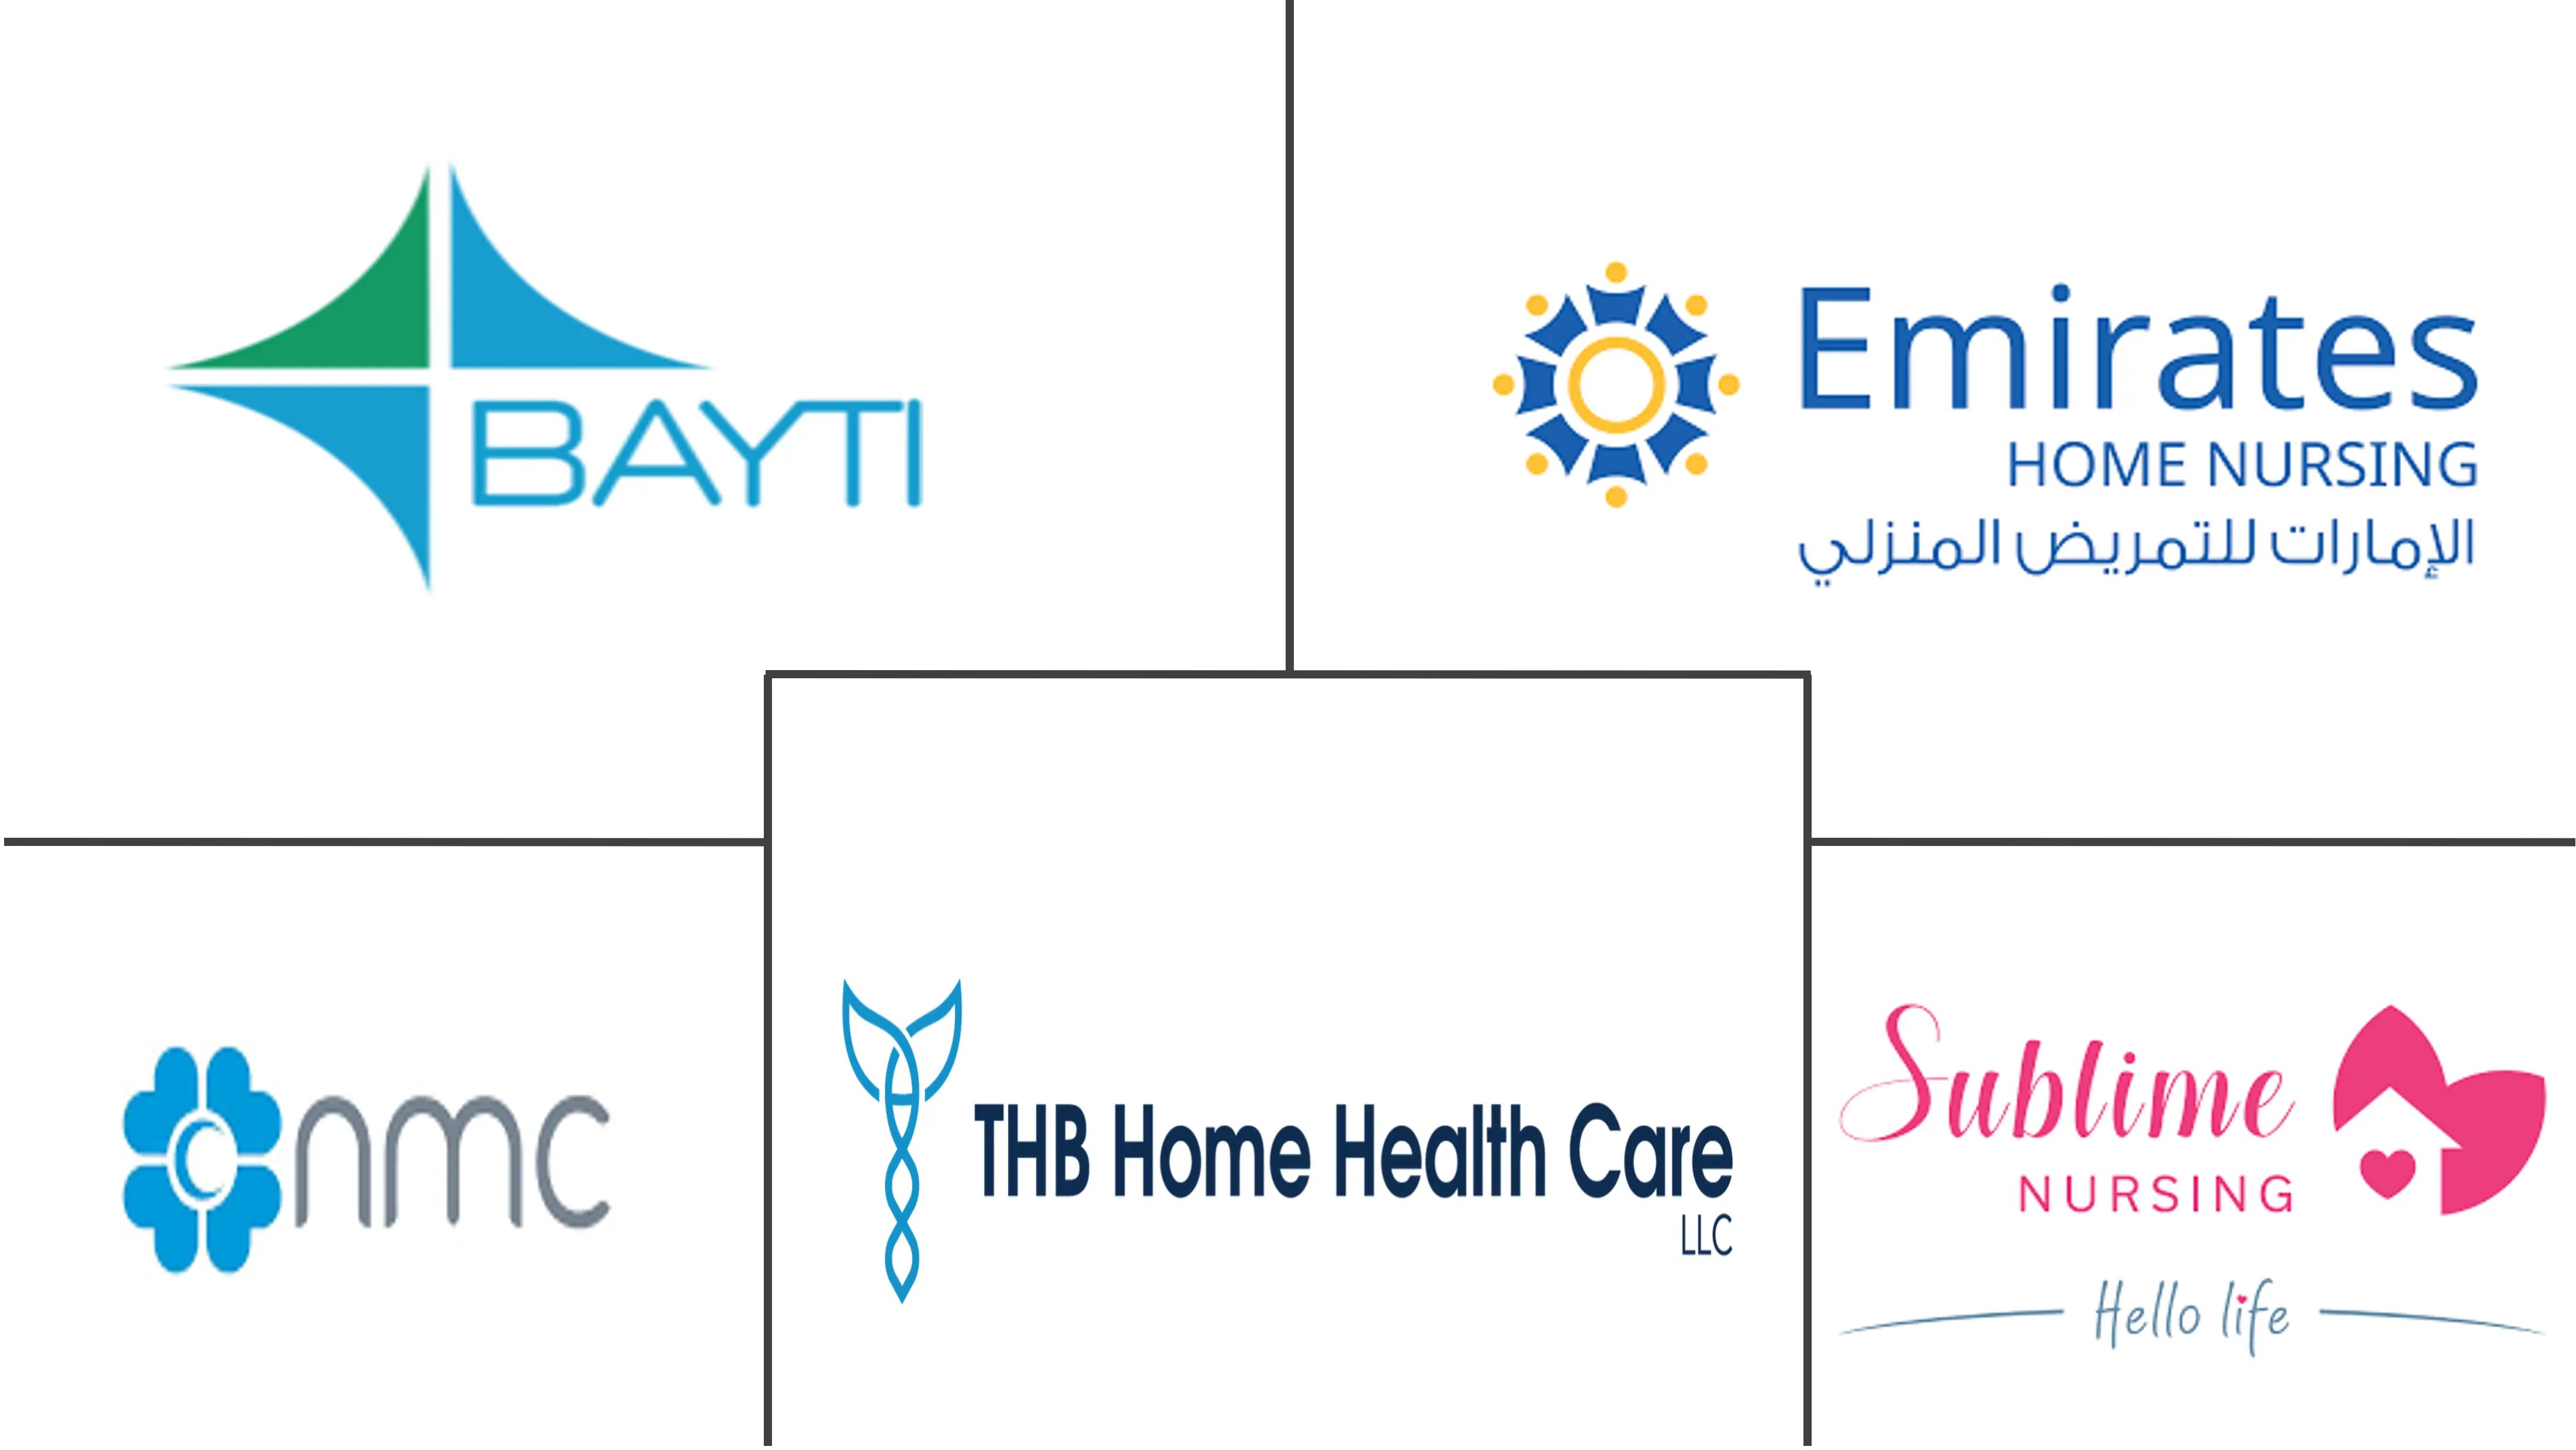  Home Healthcare Industry in UAE Major Players